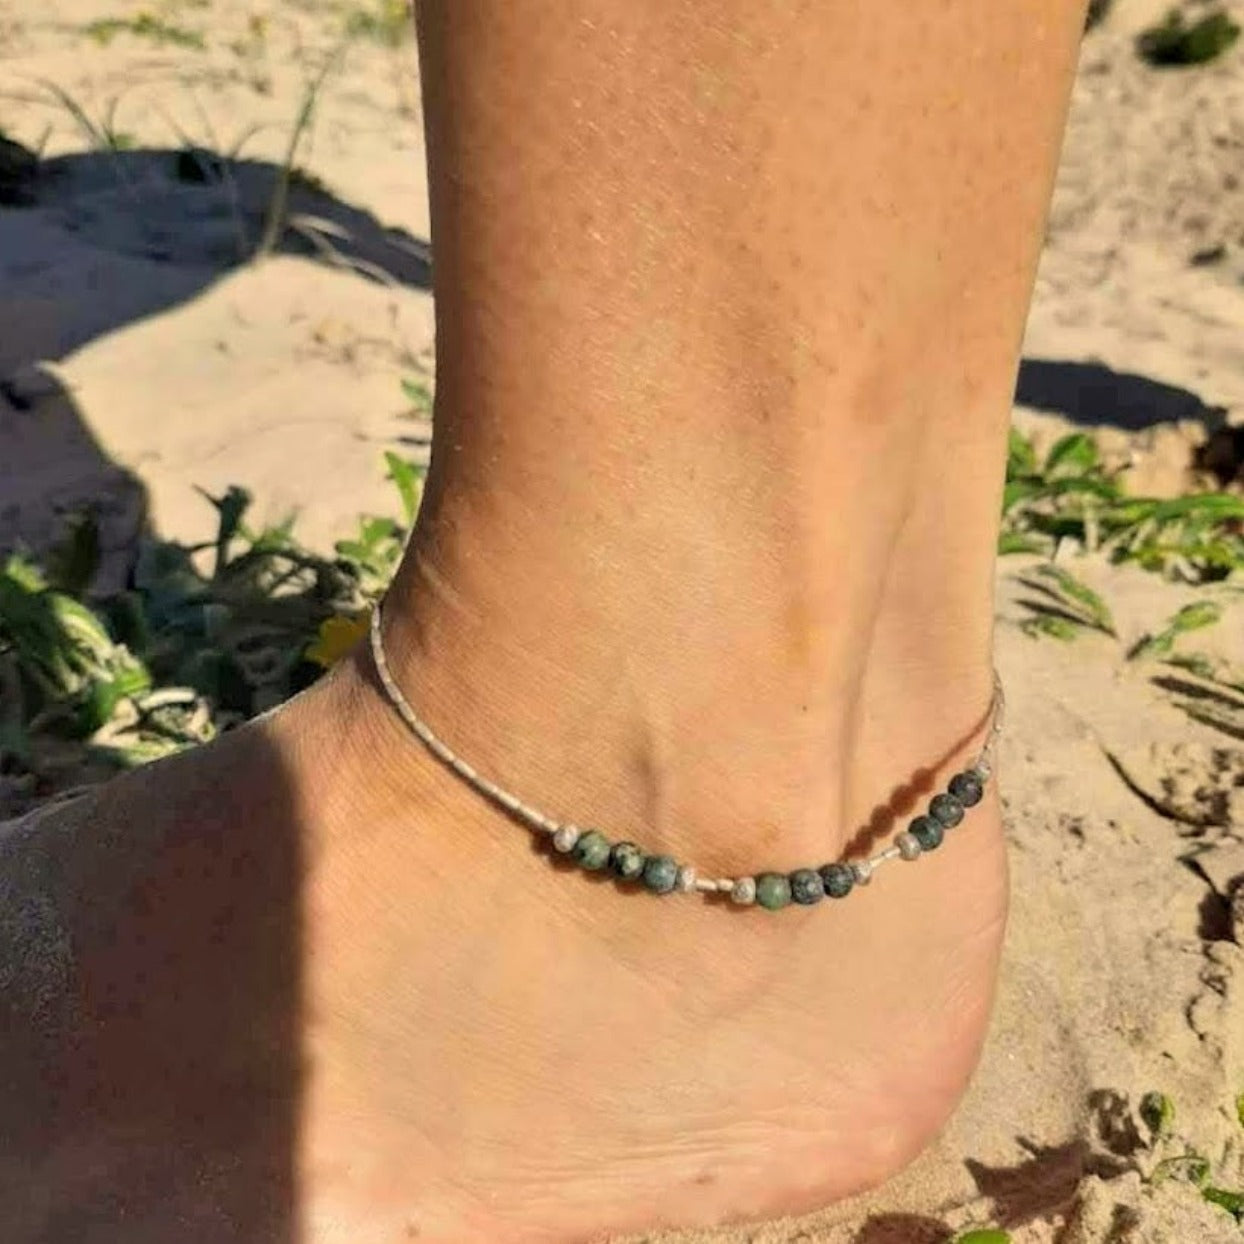 THREE CHARMS - HILLTRIBE SILVER CHARMS / TURQUOISE STONES - Premium anklets from www.beachboho.com.au - Just $95! Shop now at www.beachboho.com.au